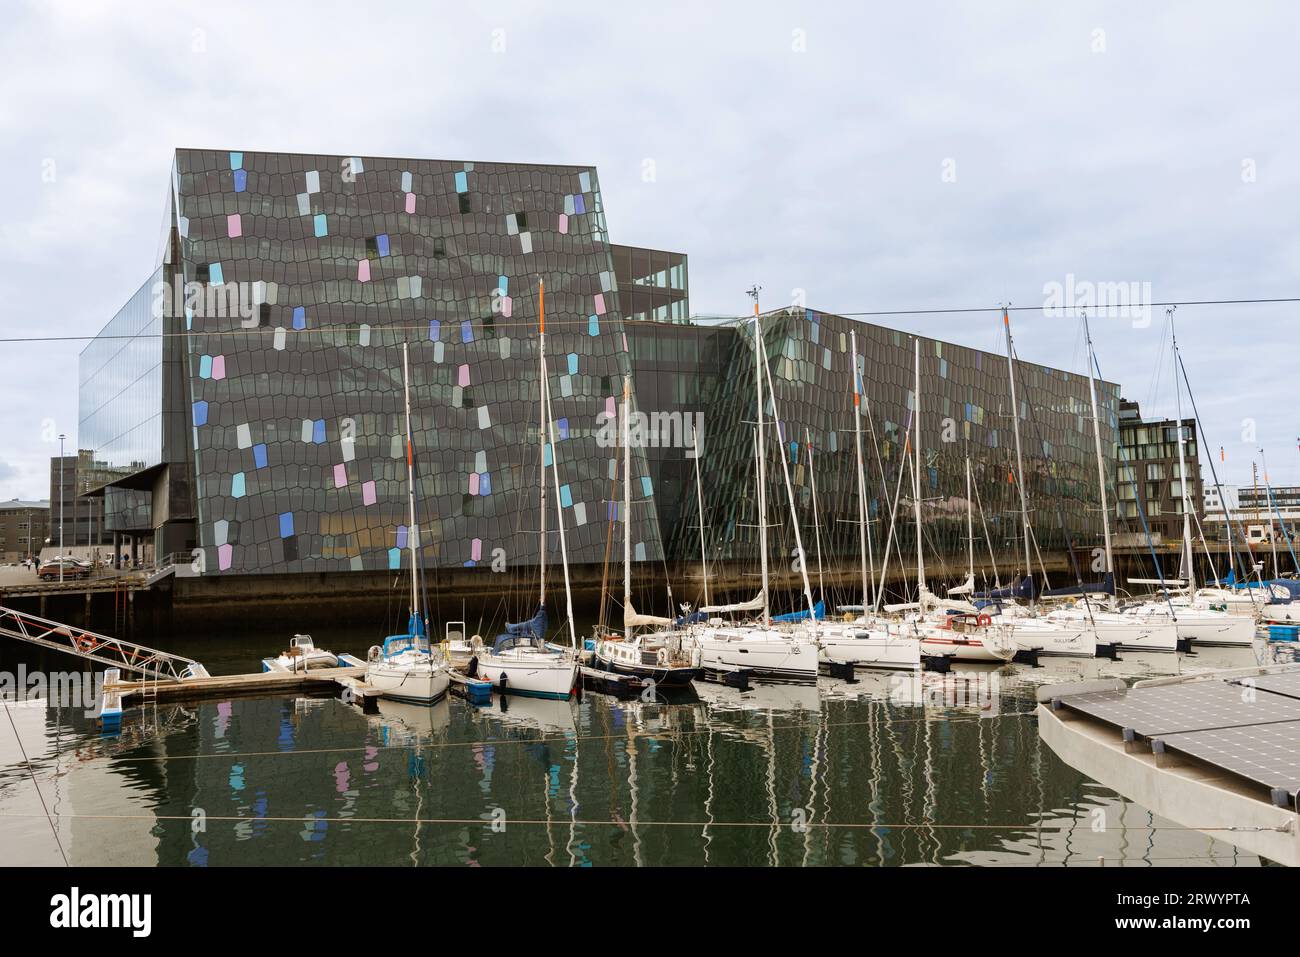 Harpa Reykjavik Concert Hall and Conference Centre with numerous pleasure crafts in the foreground, Iceland, Old Habour, Reykjavik Stock Photo